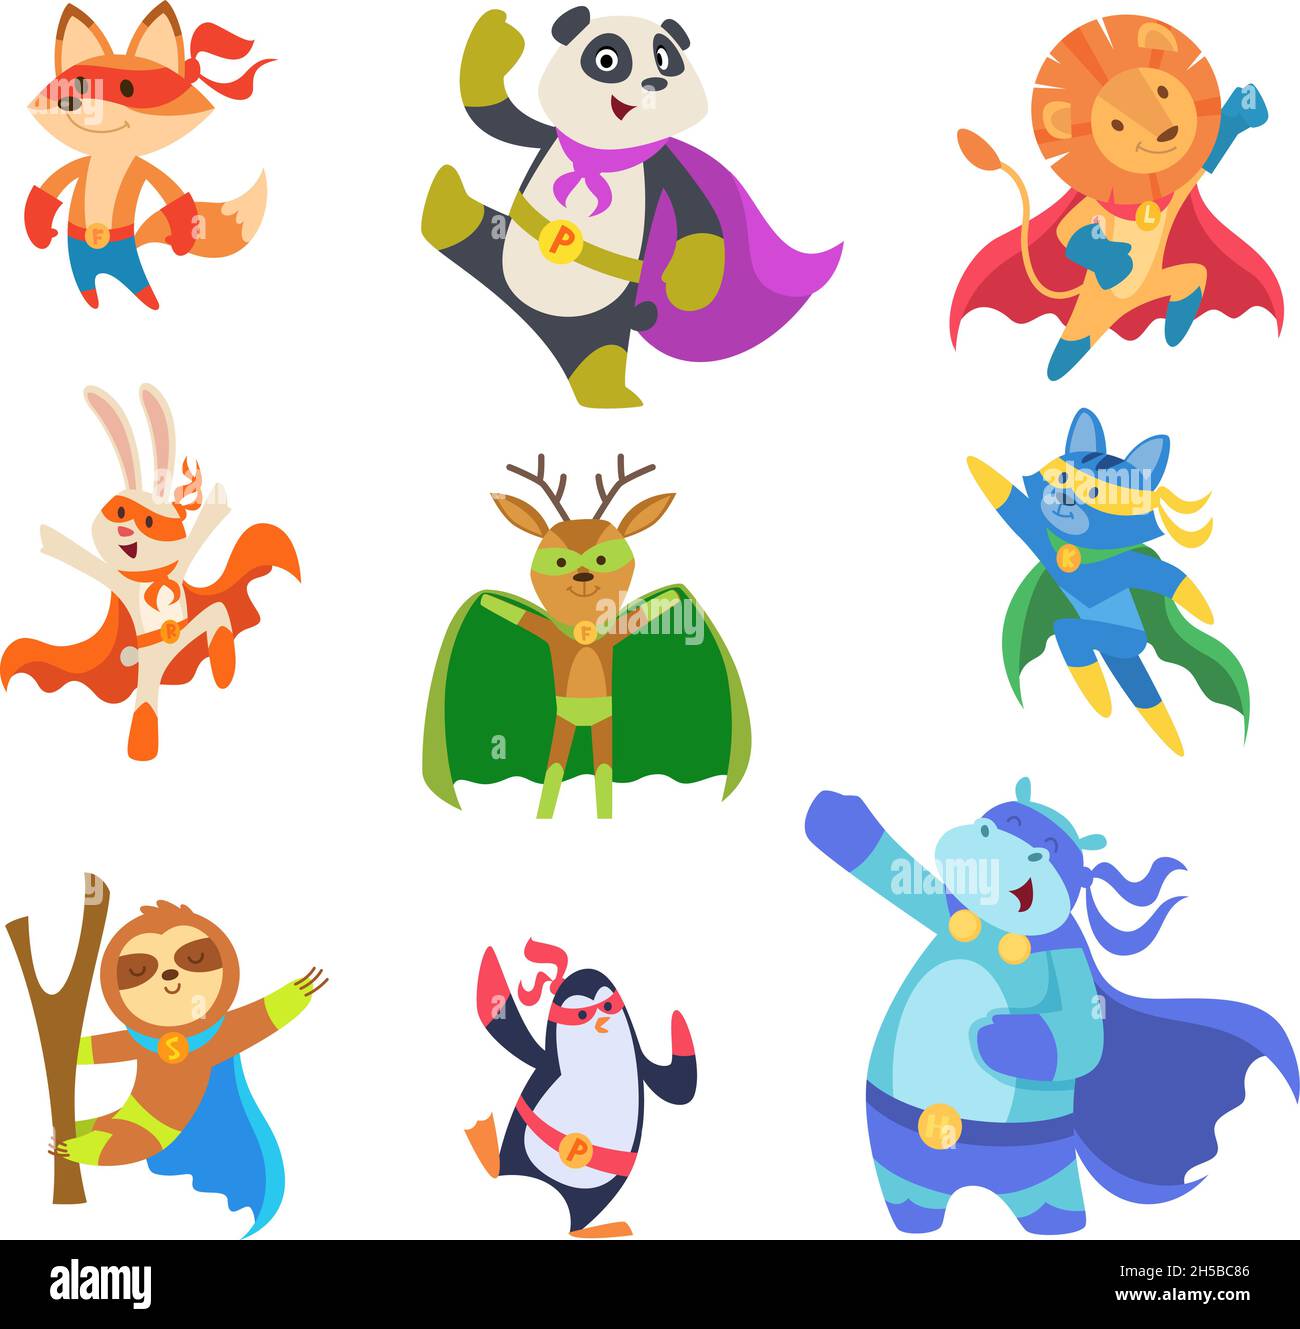 Hero animals. Zoo strong defenders city superheroes in mask cats dogs elephants exact vector flat characters collection set Stock Vector